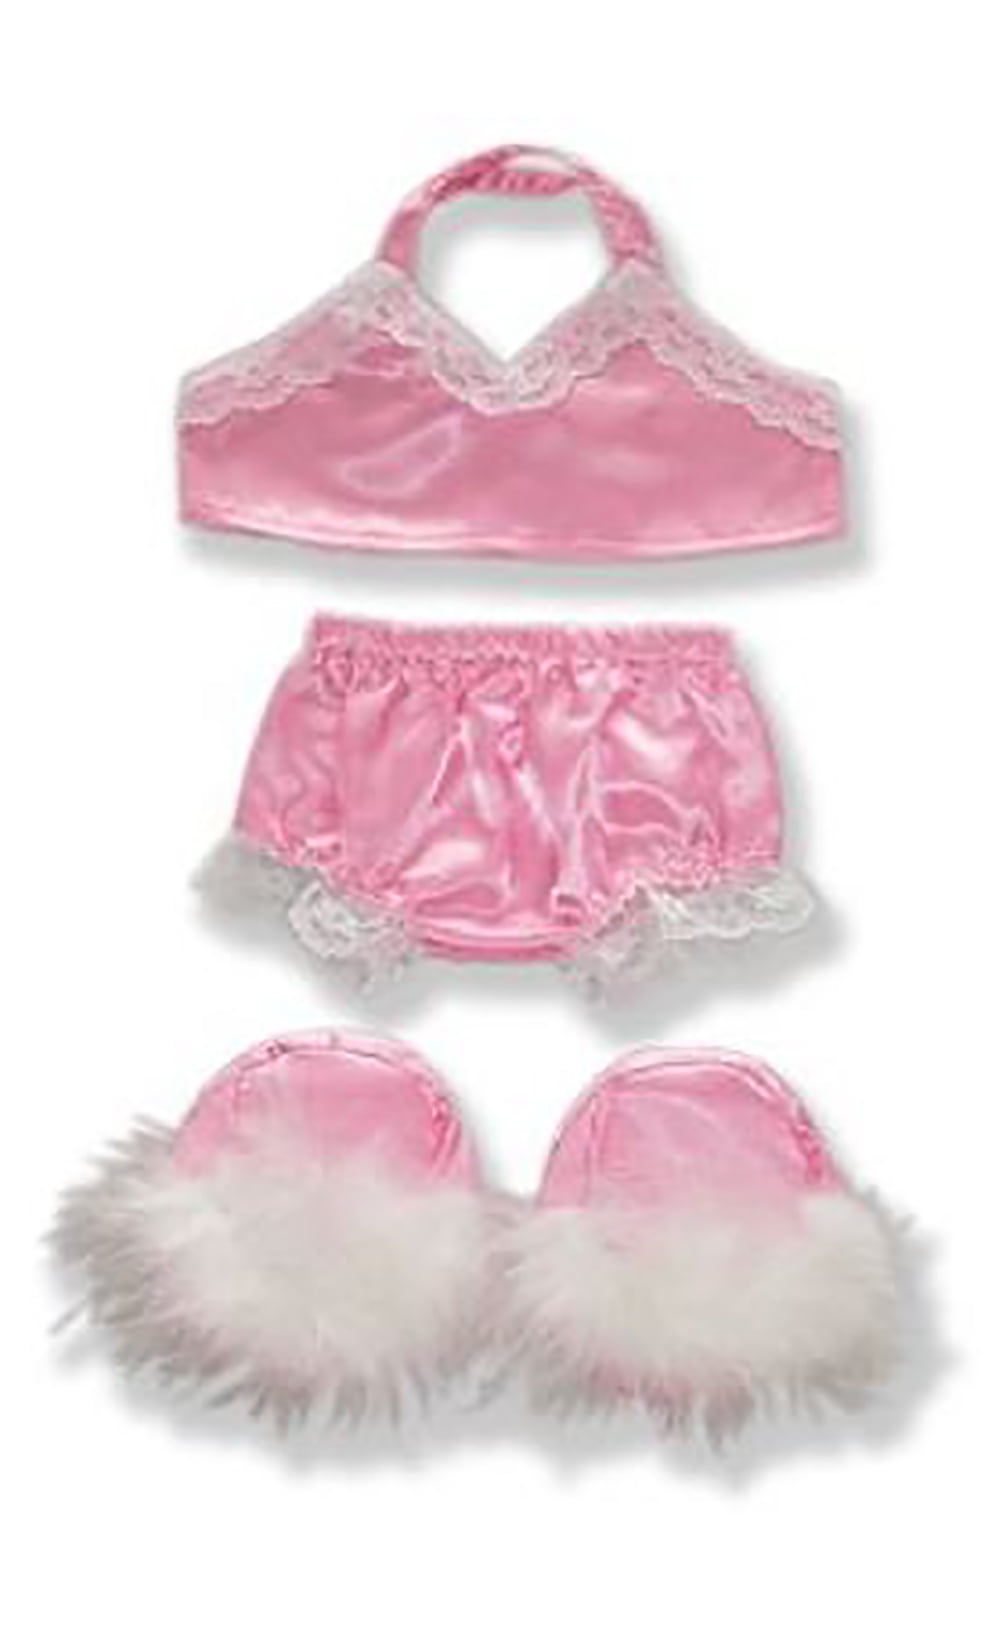 Angel Costume Teddy Bear Clothes Outfit Fits Most 14" 18" Build-A-Bear and Mak 